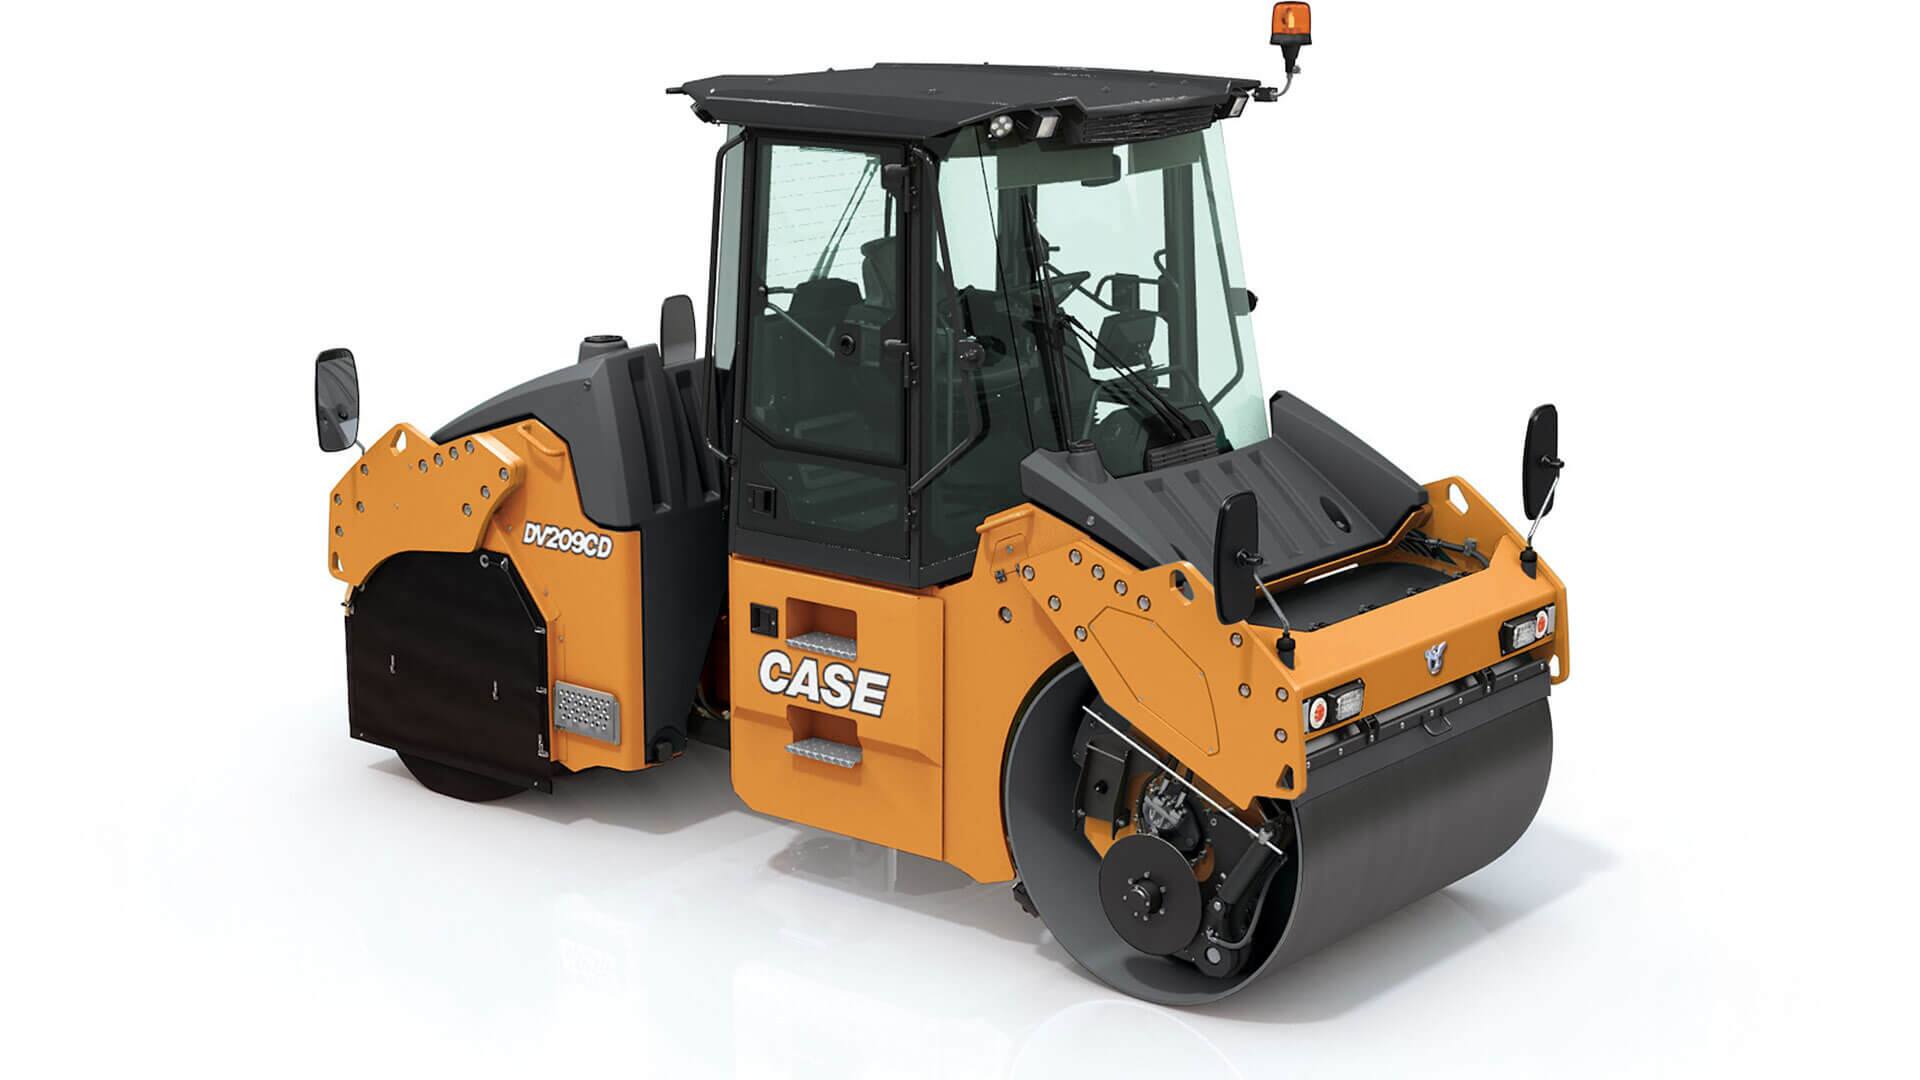 https://assets.cnhindustrial.com/casece/nafta/assets/Products/Compaction-Equipment/Double-Drum-Rollers/DV209CD_ARX_110K_T4i_Heavy_Tandem_Roller__22.jpg?Width=800&Height=450